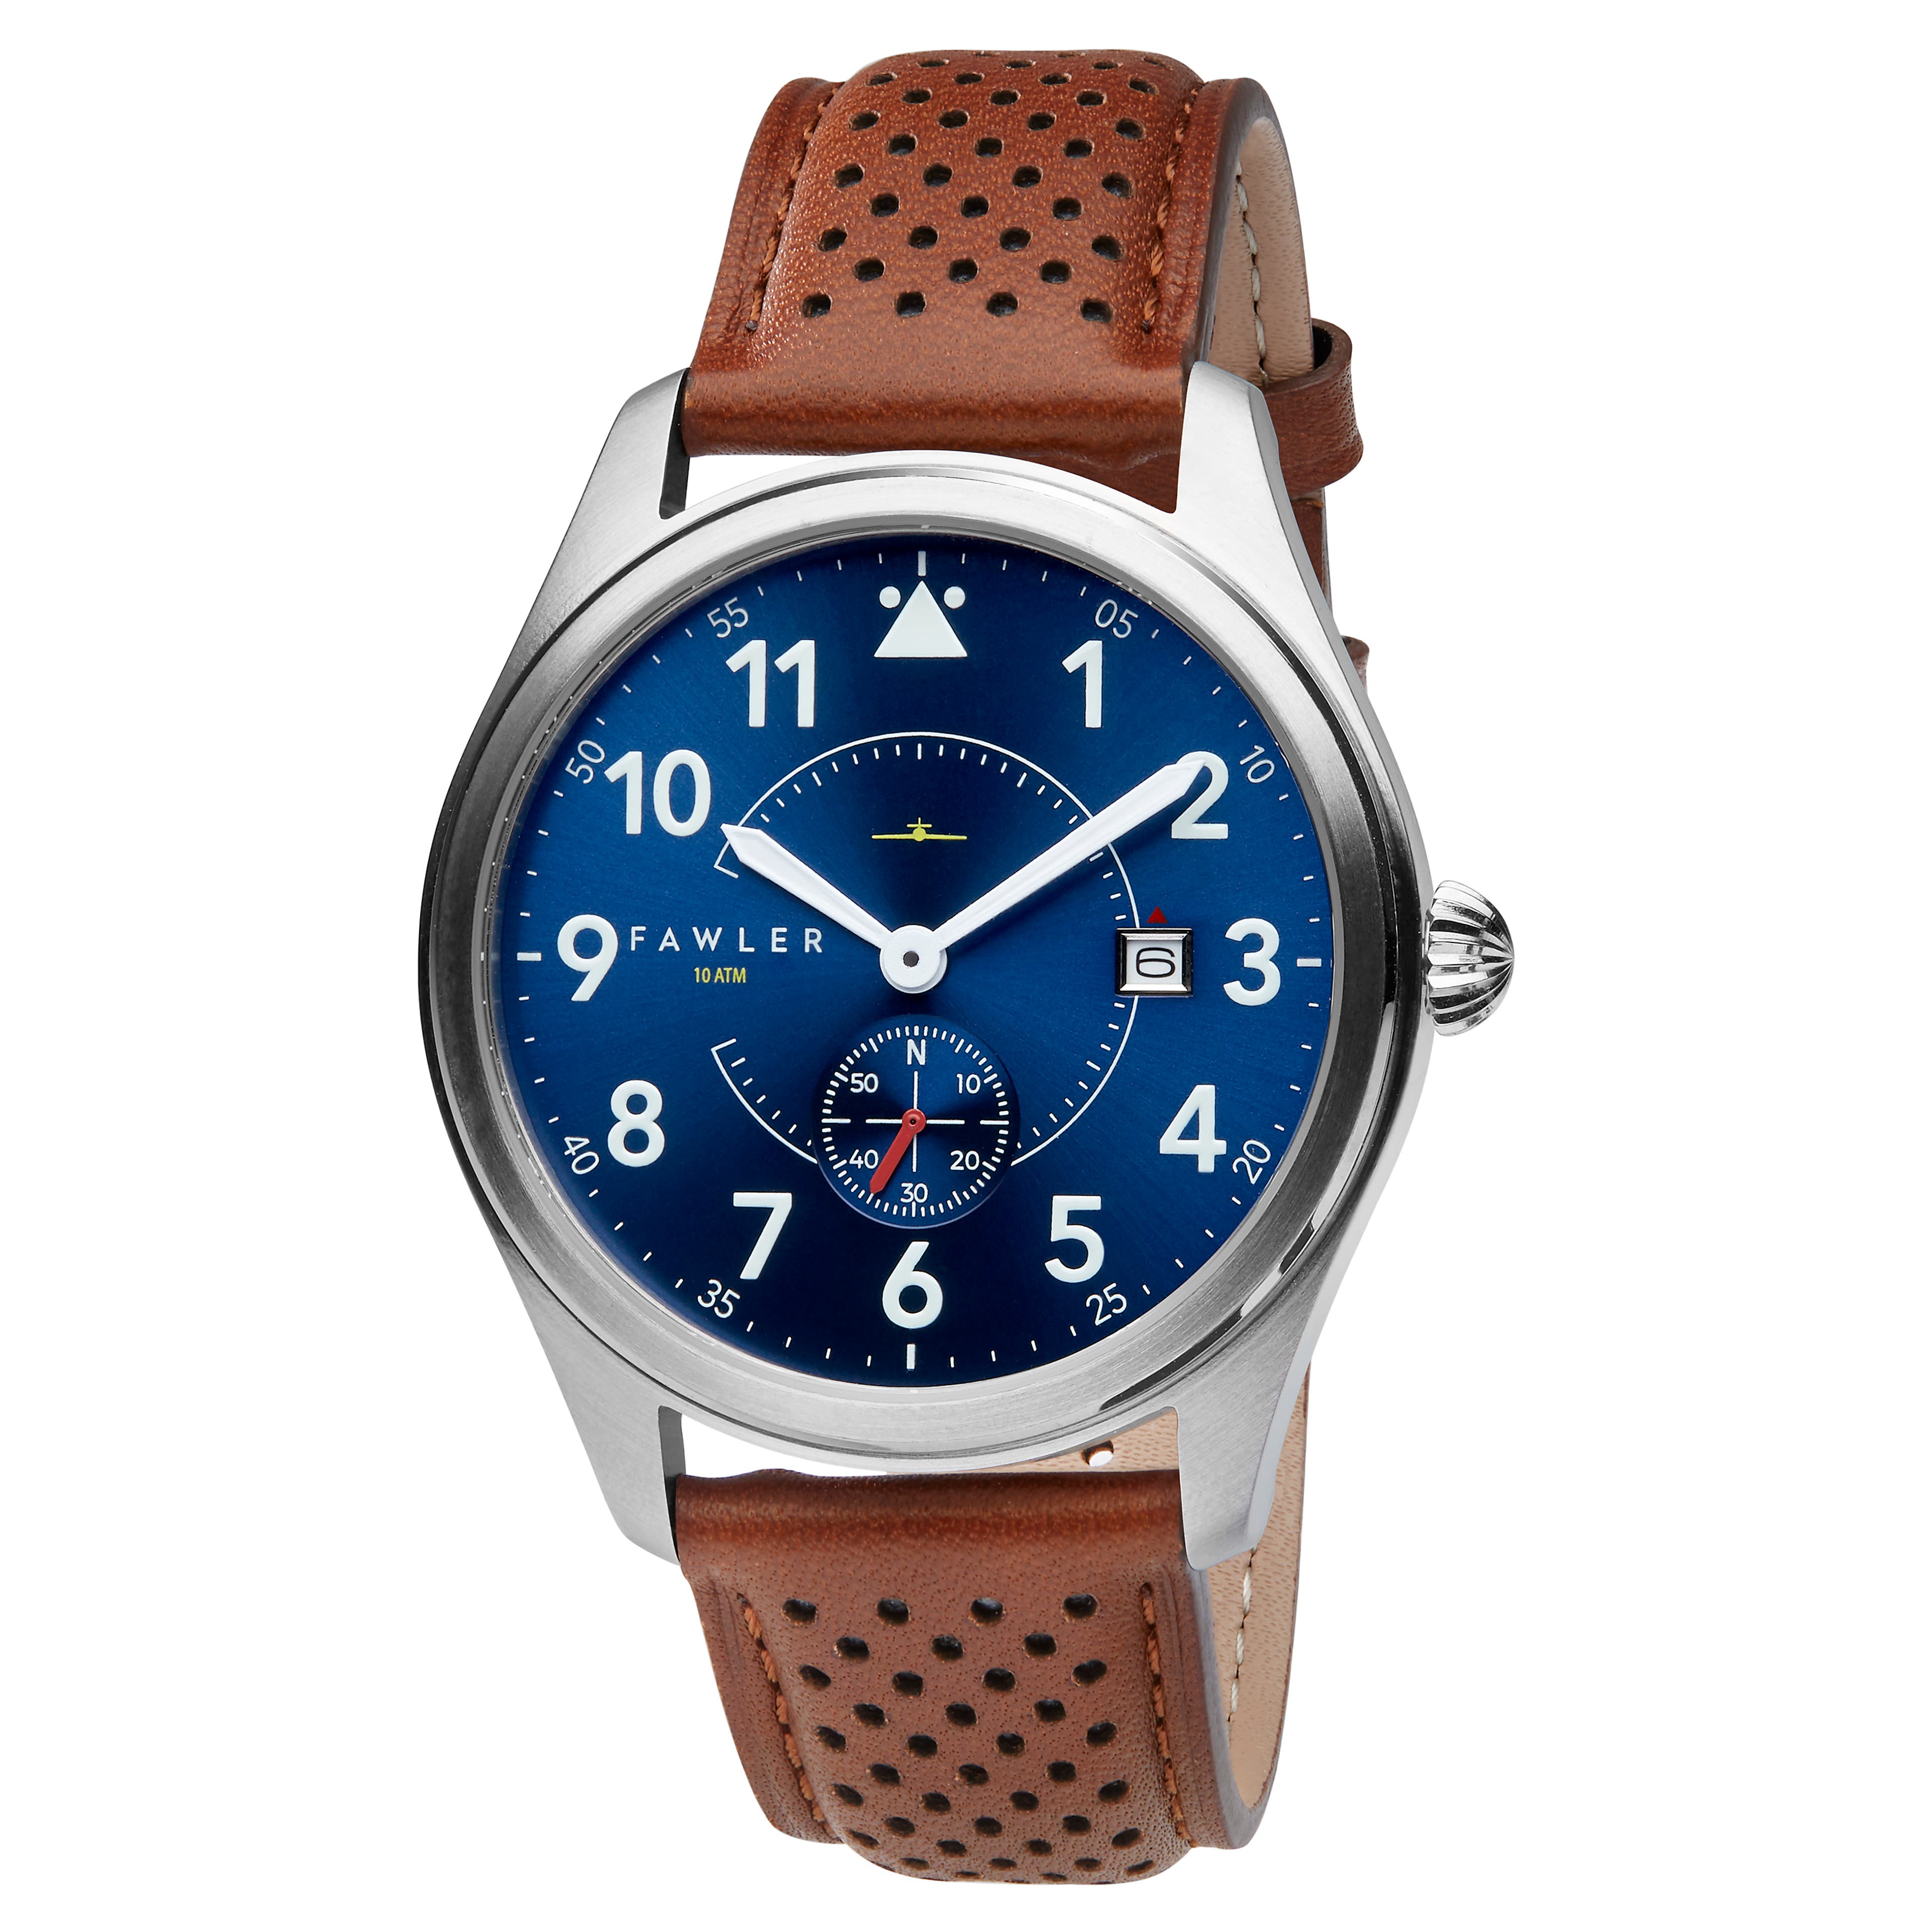 Aviator | Silver-Tone Aviator Watch With Blue Dial, White Numbers, Arms & Rust Strap